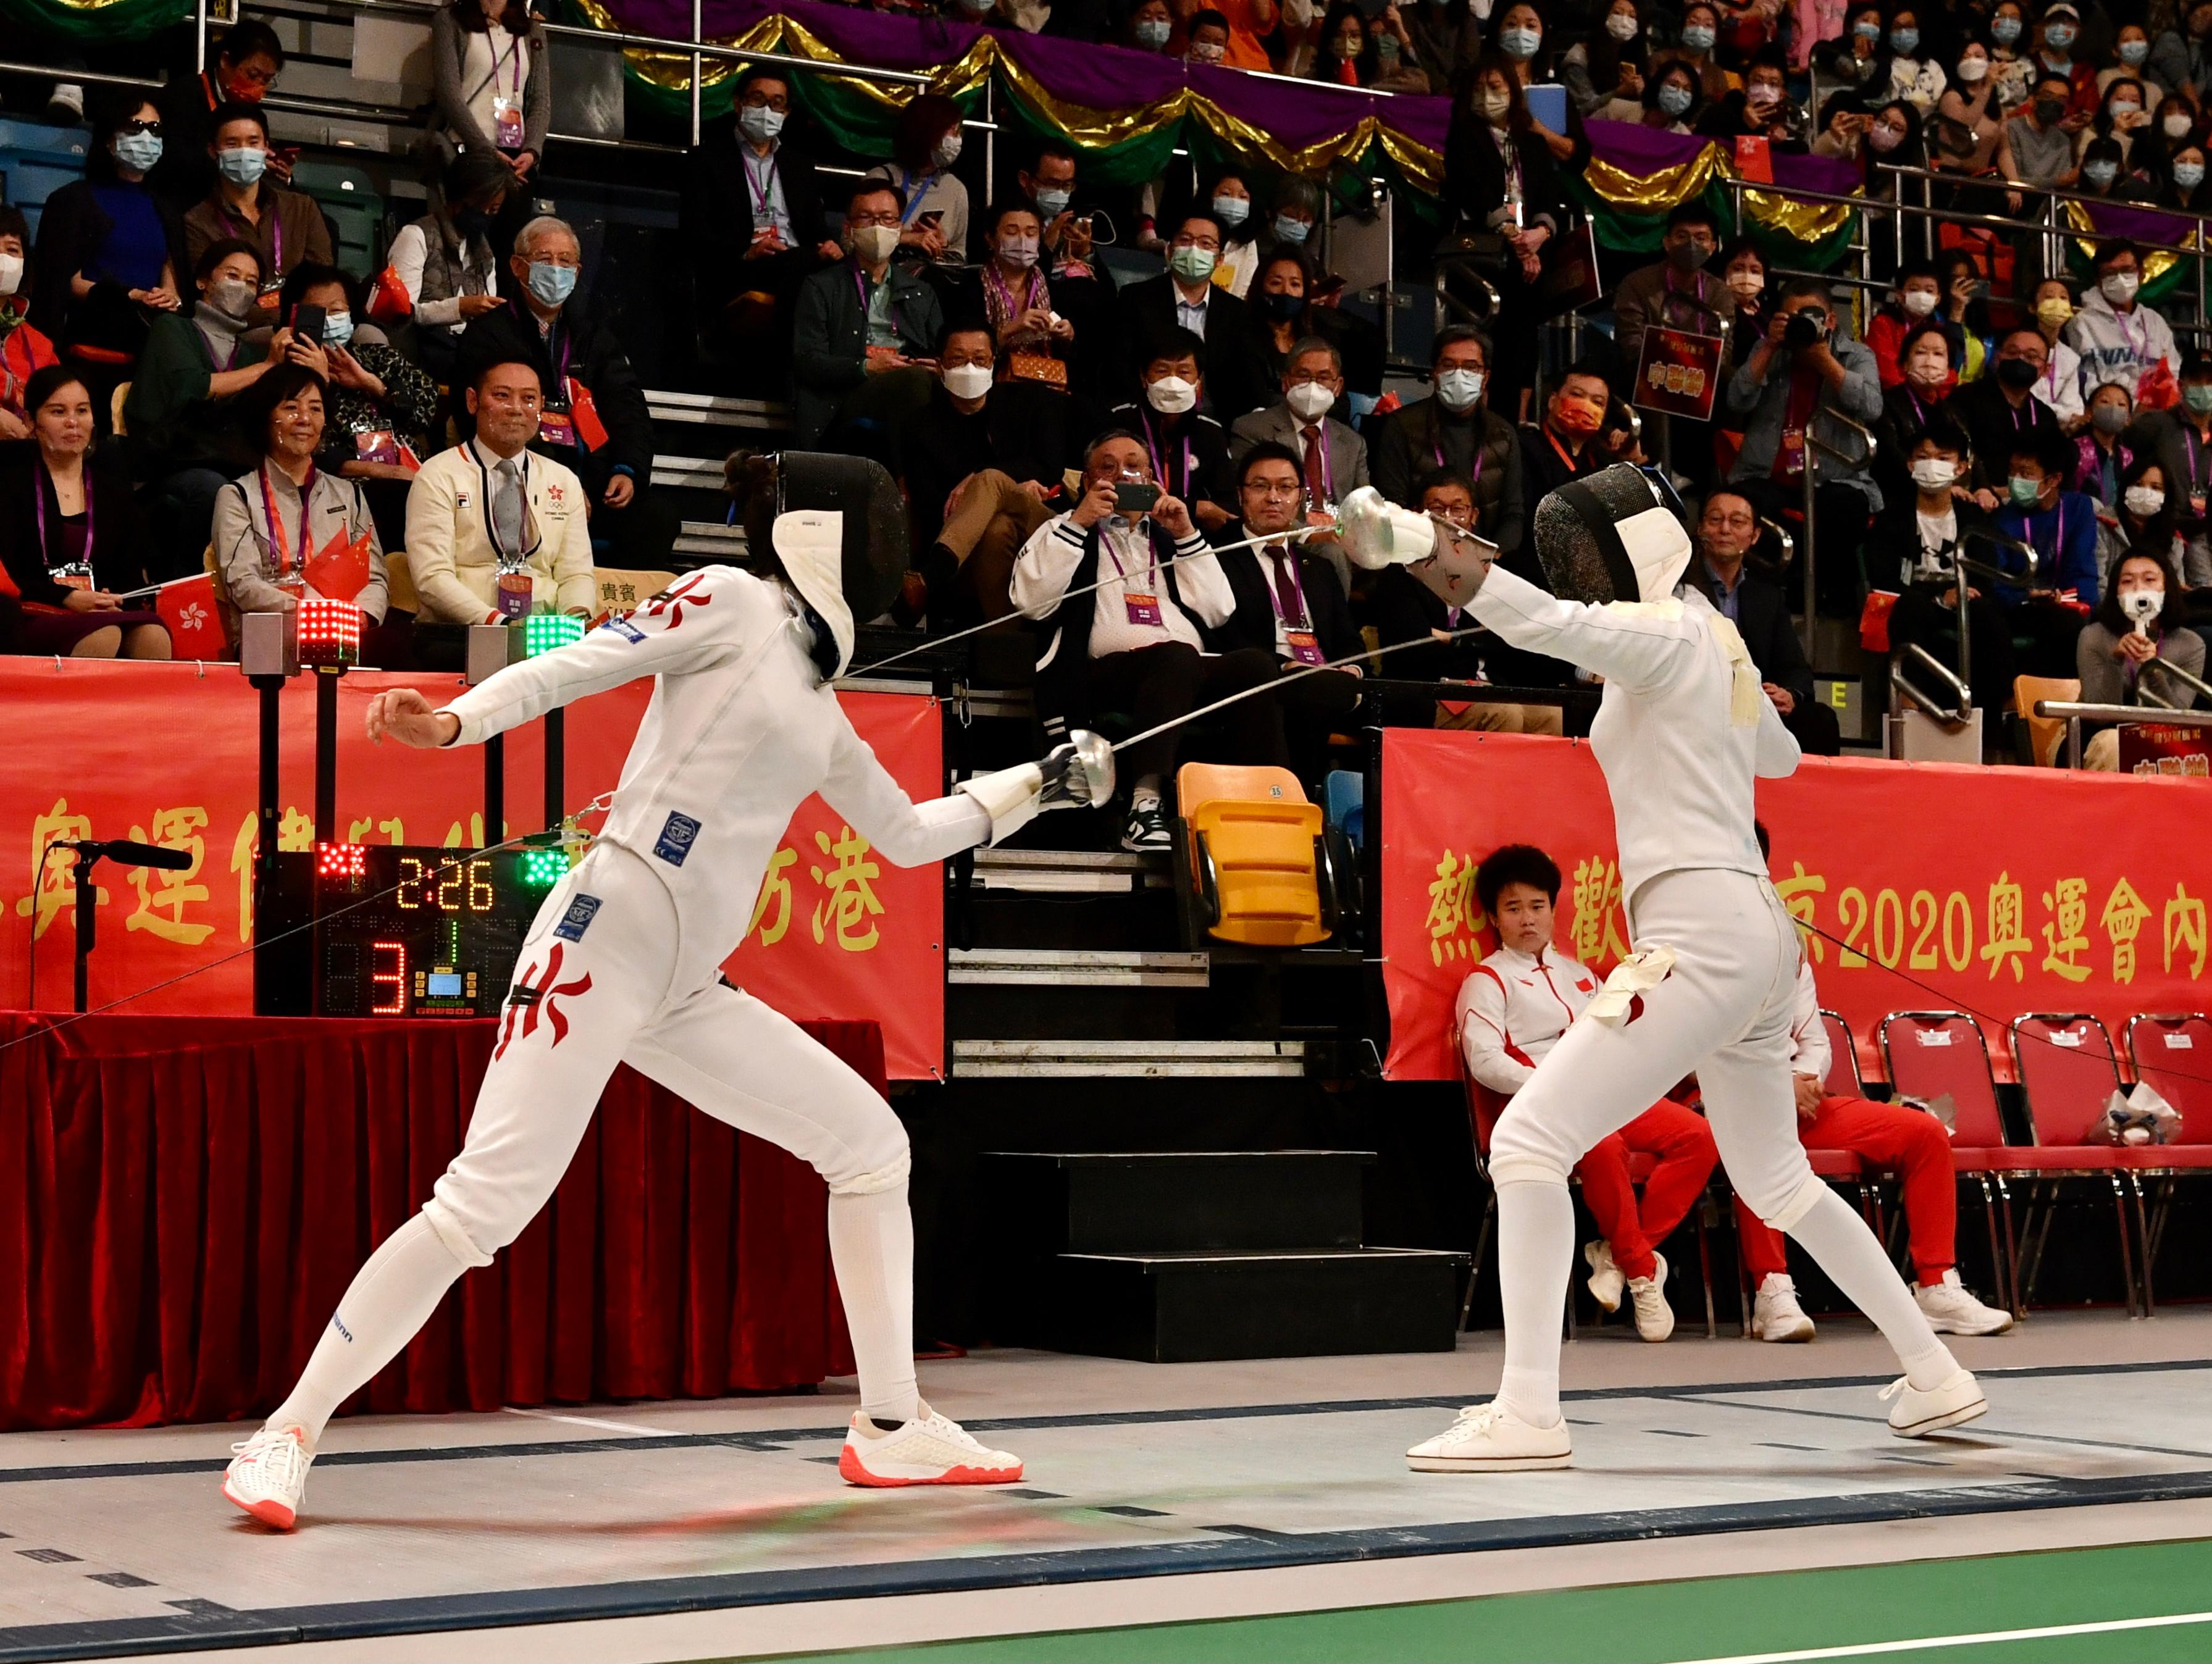 The delegation of Tokyo 2020 Olympic Games Mainland Olympians attended the sports demonstrations at Queen Elizabeth Stadium in Wan Chai this morning (December 4). Photo shows Mainland fencing athlete Sun Yiwen (right) and Hong Kong fencing athlete Vivian Kong (left) performing Épée demonstration.